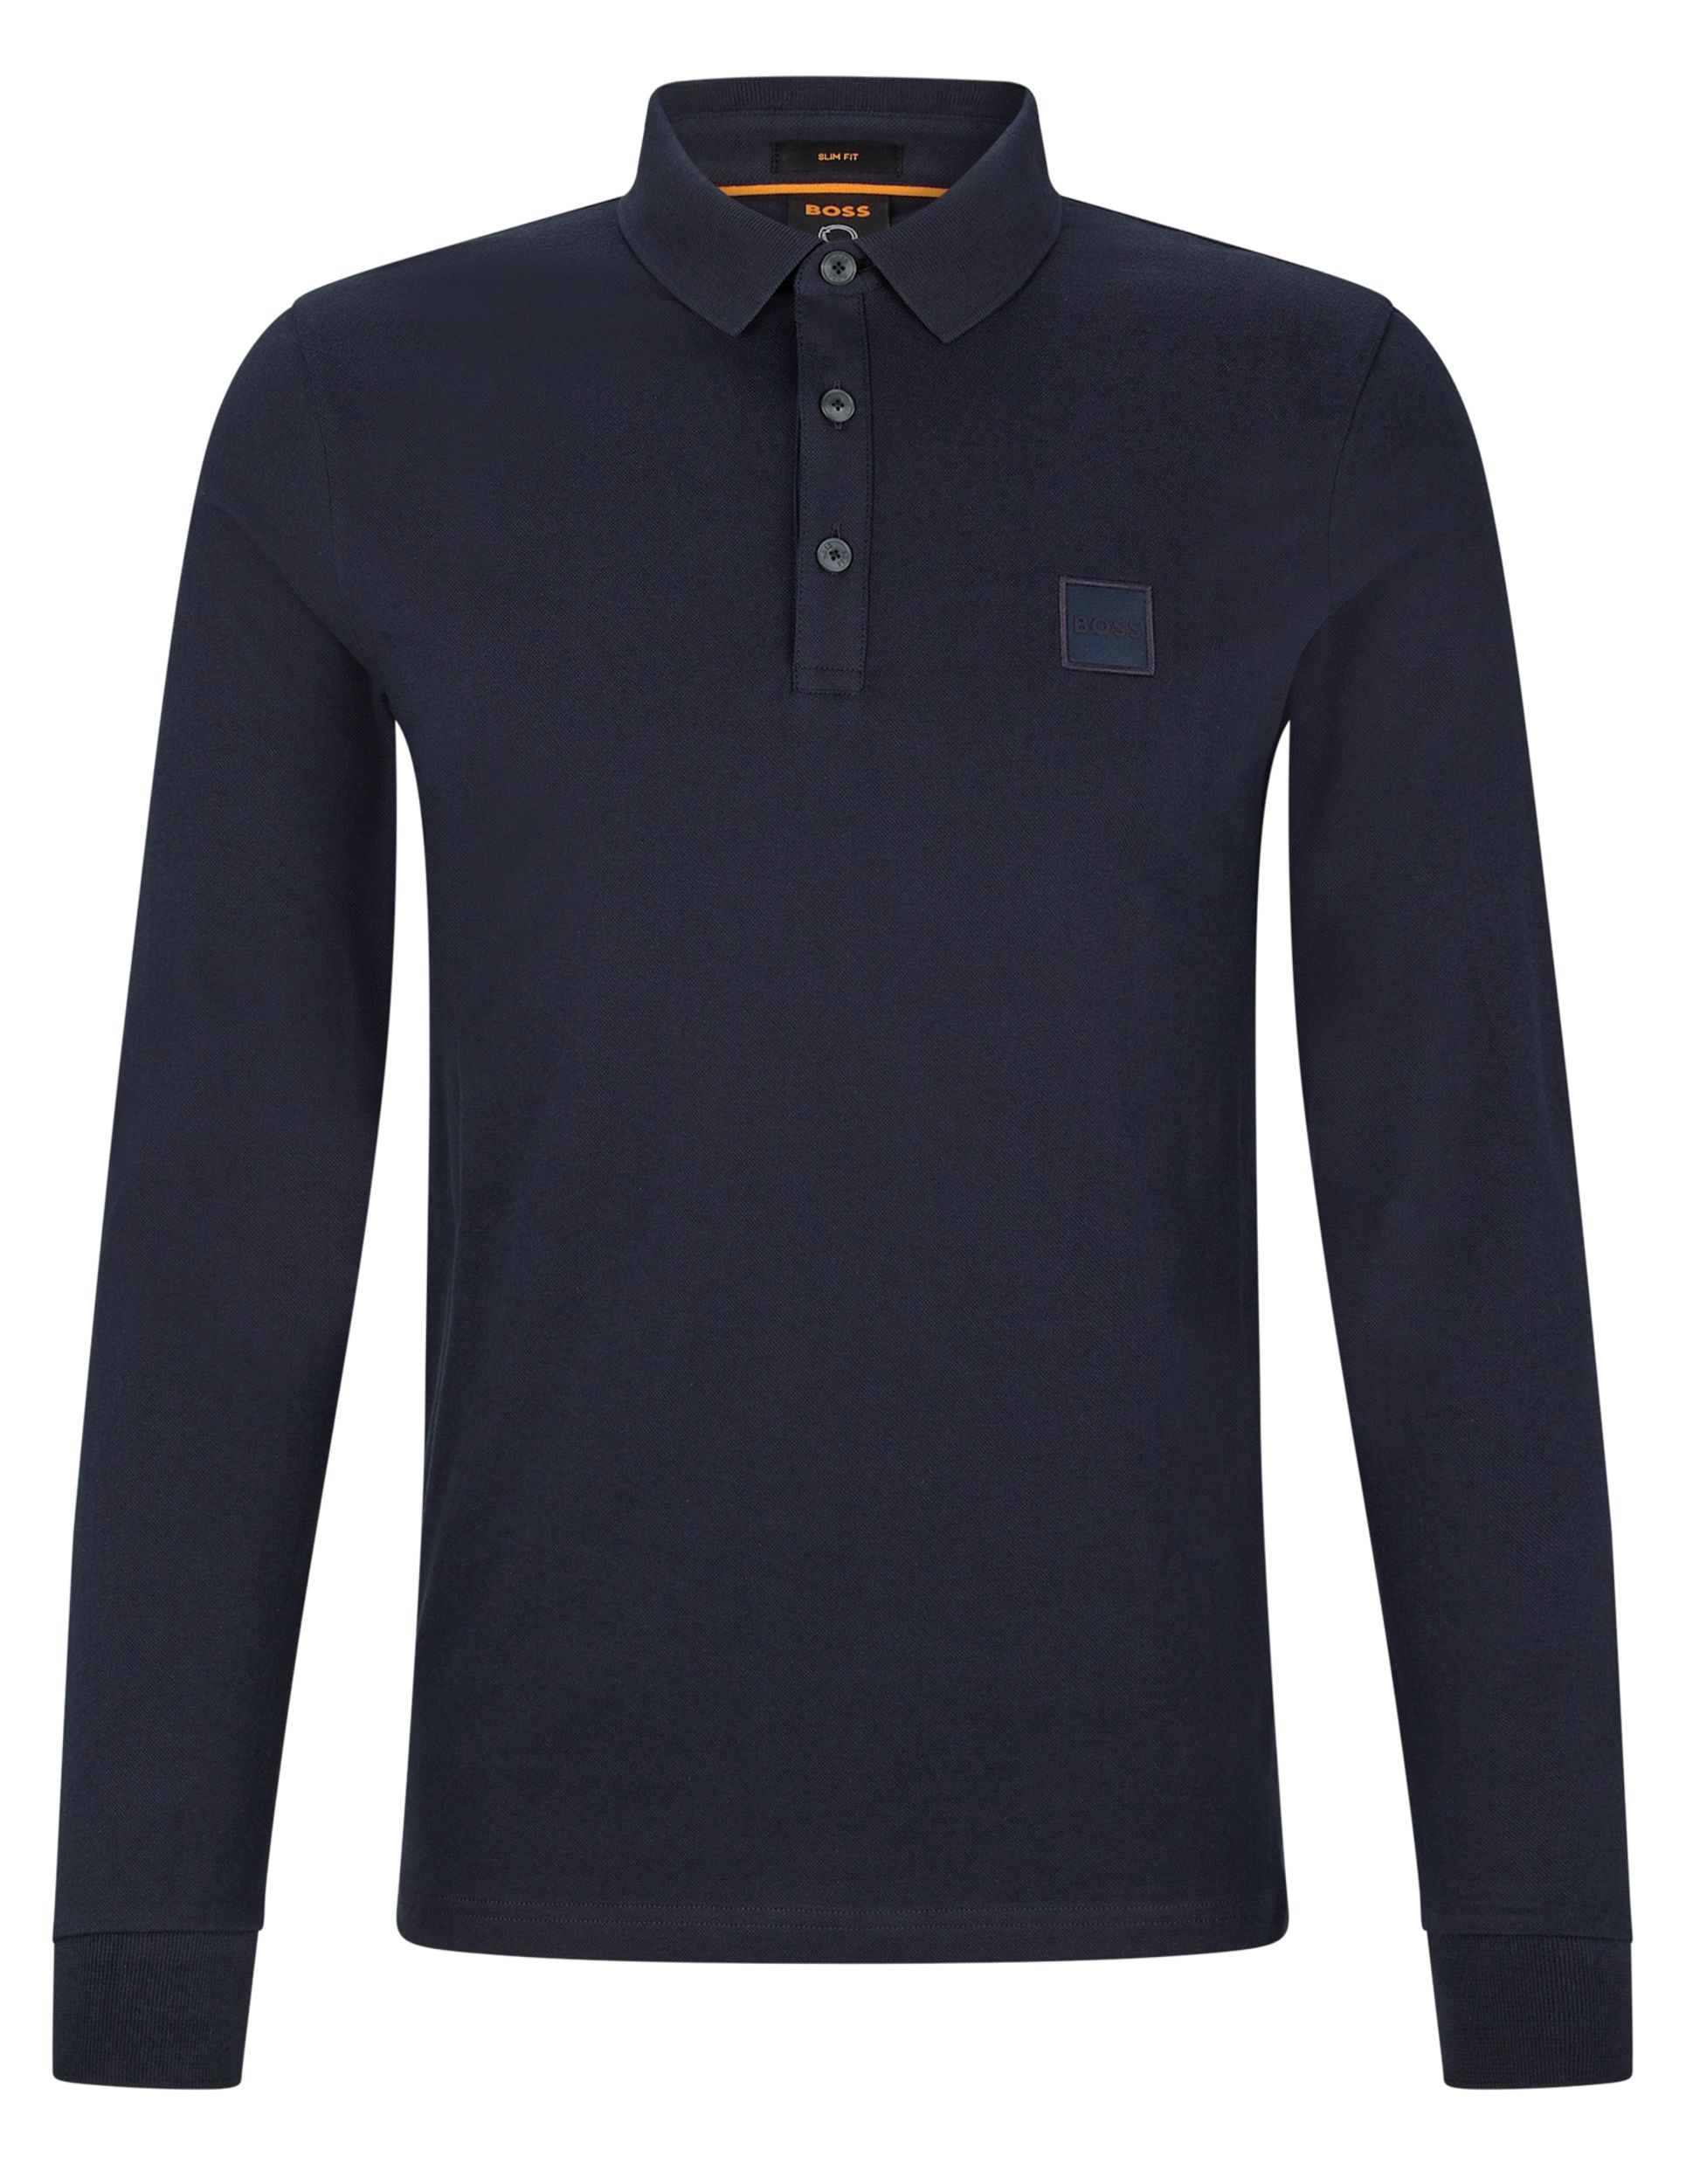 Boss Passerby Polo LM Donker blauw 074035-001-L